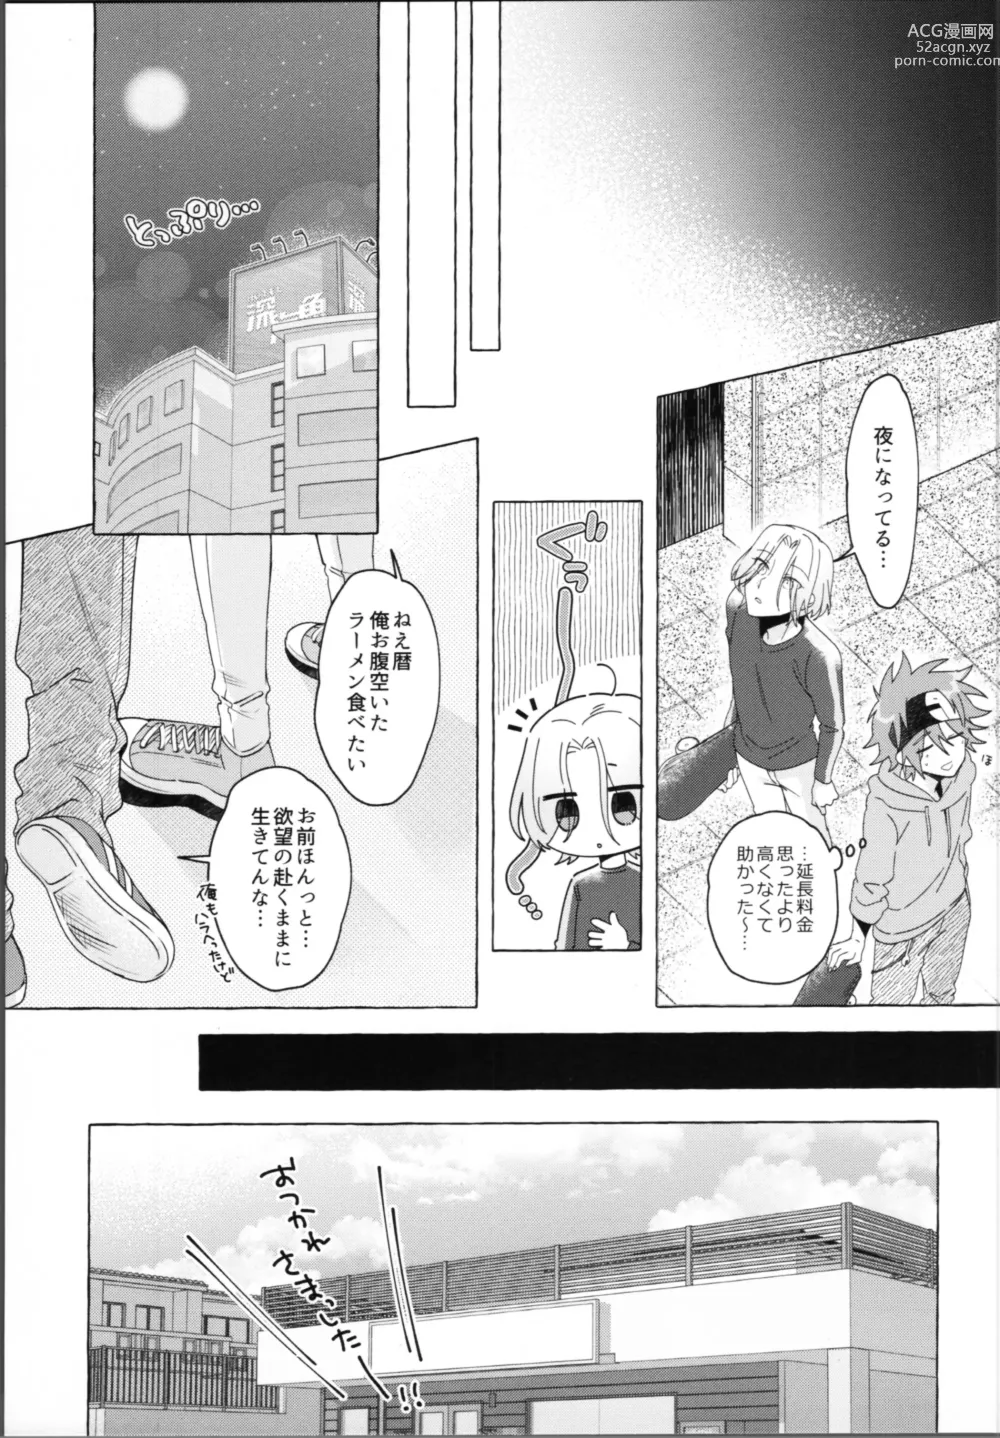 Page 26 of doujinshi Love Hotel tte Donna Toko?